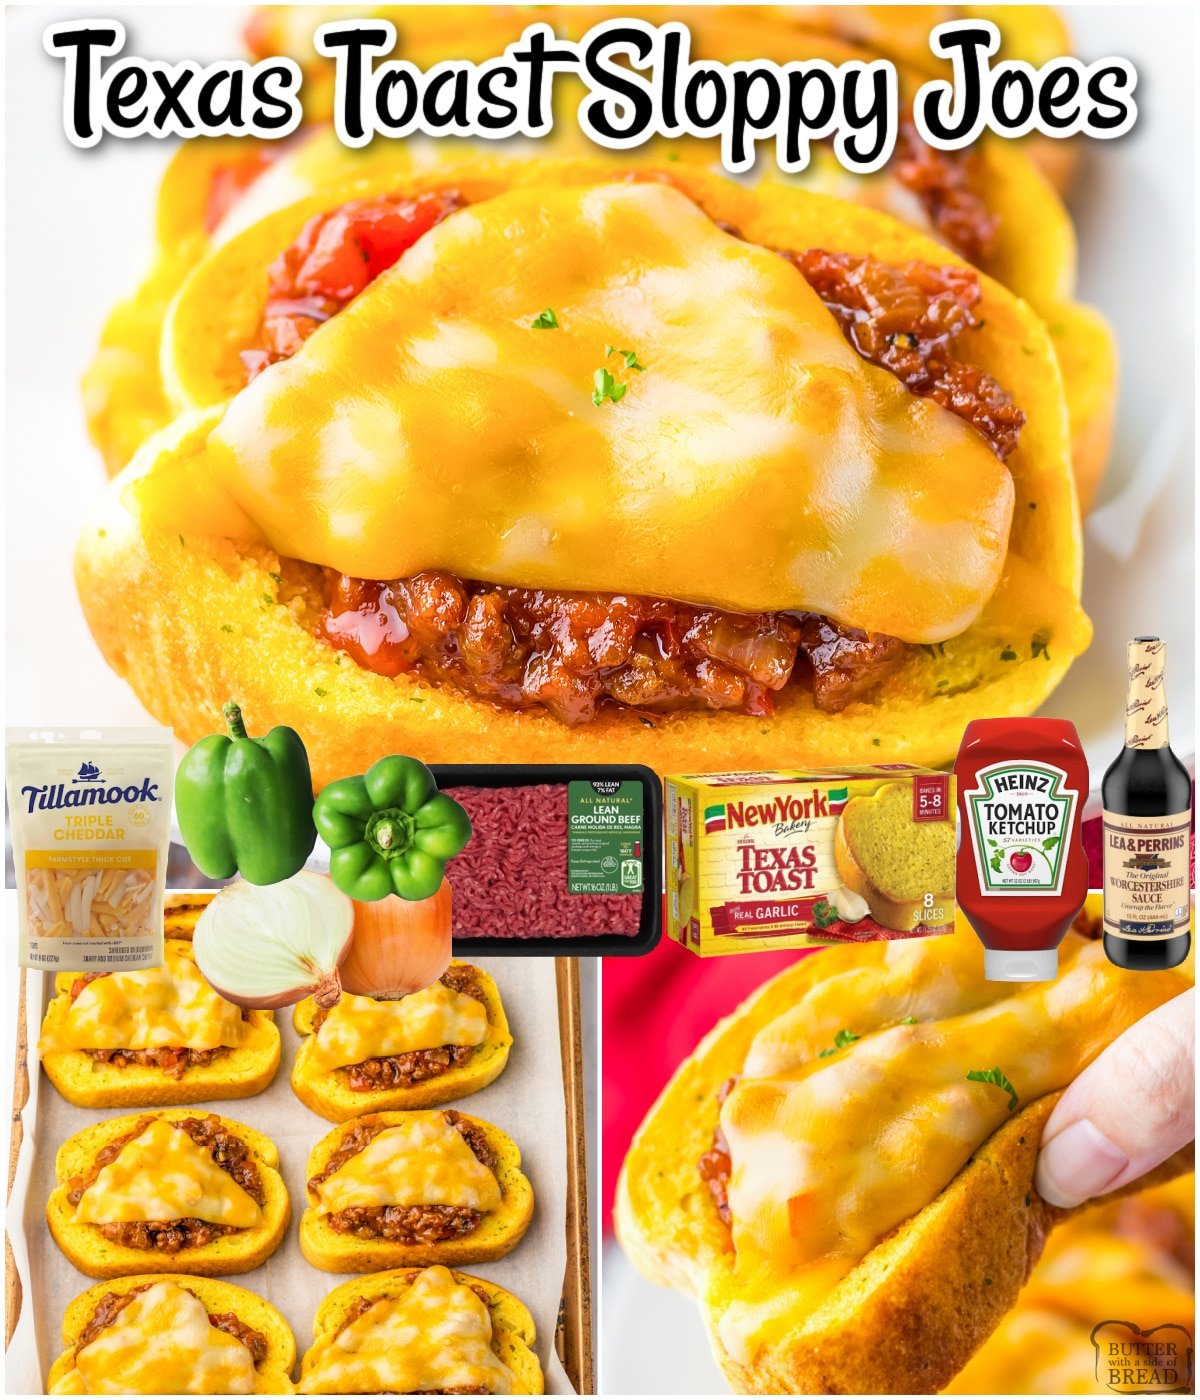 Texas Toast Sloppy Joes are a quick & easy weeknight dinner that the whole family is sure to enjoy! Flavorful sloppy joe mix is piled on top of Texas toast garlic bread and topped with a slice of melty cheese.